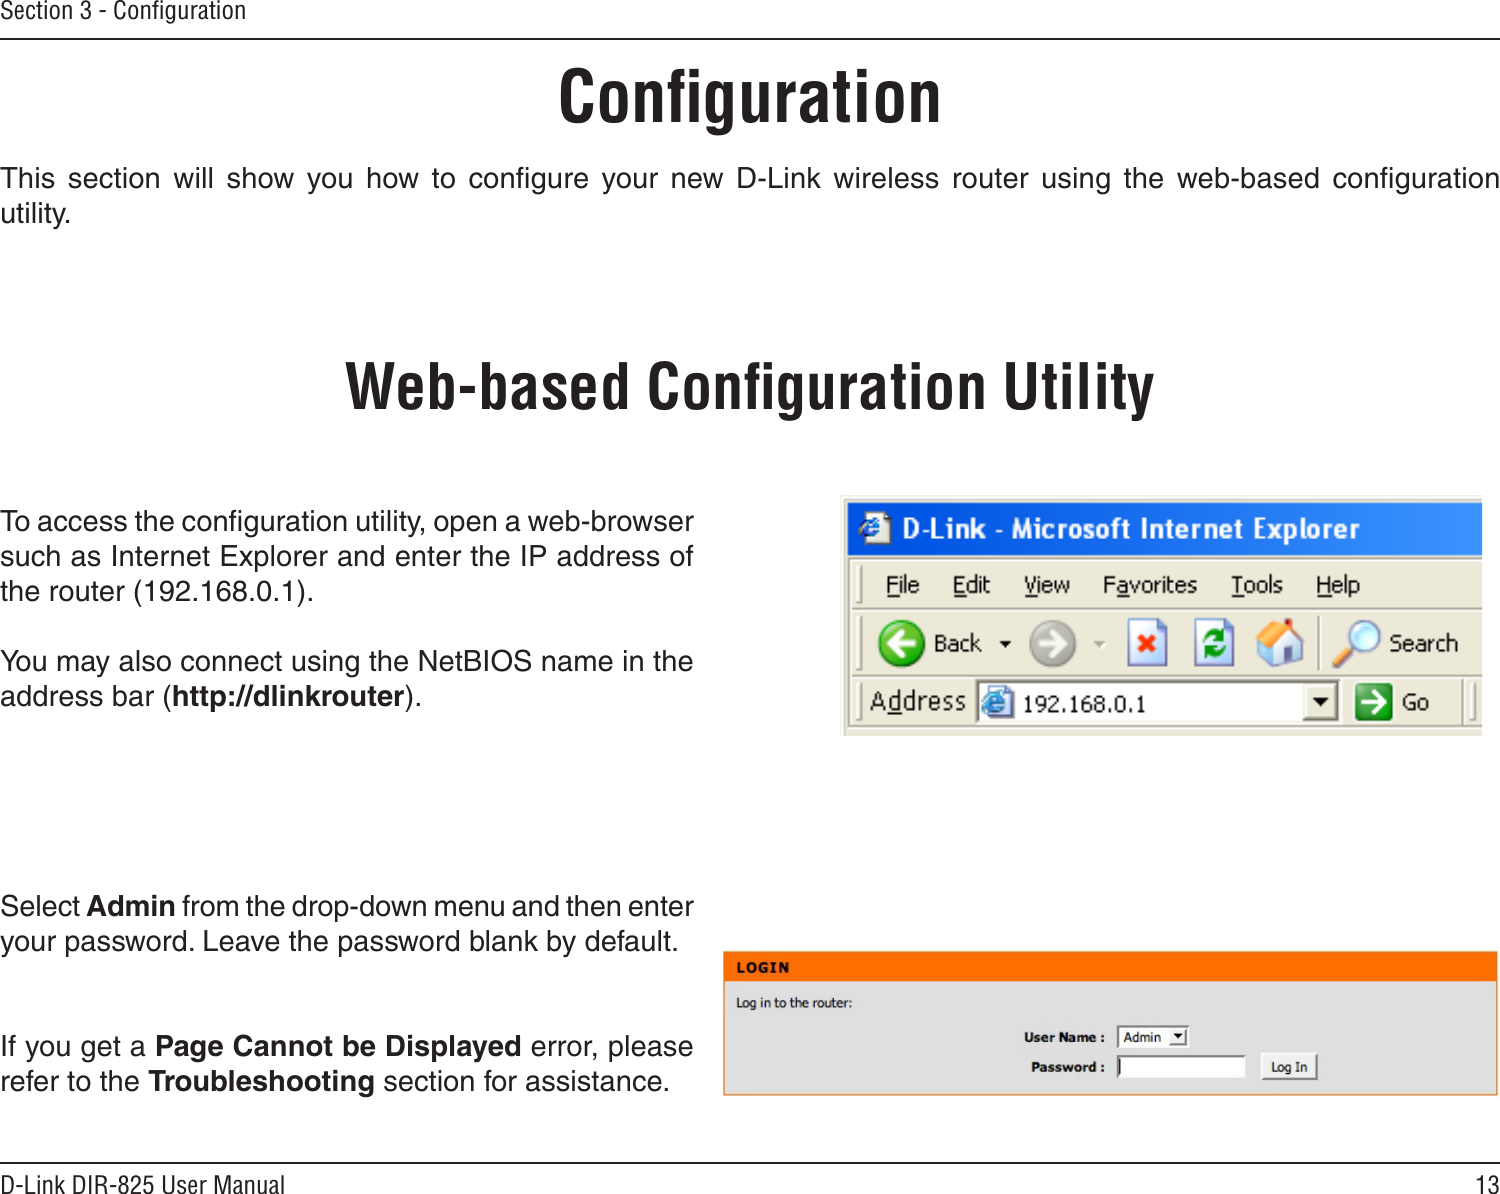 13D-Link DIR-825 User ManualSection 3 - ConﬁgurationConﬁgurationThis  section  will  show  you  how  to  conﬁgure  your  new  D-Link  wireless  router  using  the  web-based  conﬁguration utility.Web-based Conﬁguration UtilityTo access the conﬁguration utility, open a web-browser such as Internet Explorer and enter the IP address of the router (192.168.0.1).You may also connect using the NetBIOS name in the address bar (http://dlinkrouter).Select Admin from the drop-down menu and then enter your password. Leave the password blank by default.If you get a Page Cannot be Displayed error, please refer to the Troubleshooting section for assistance.